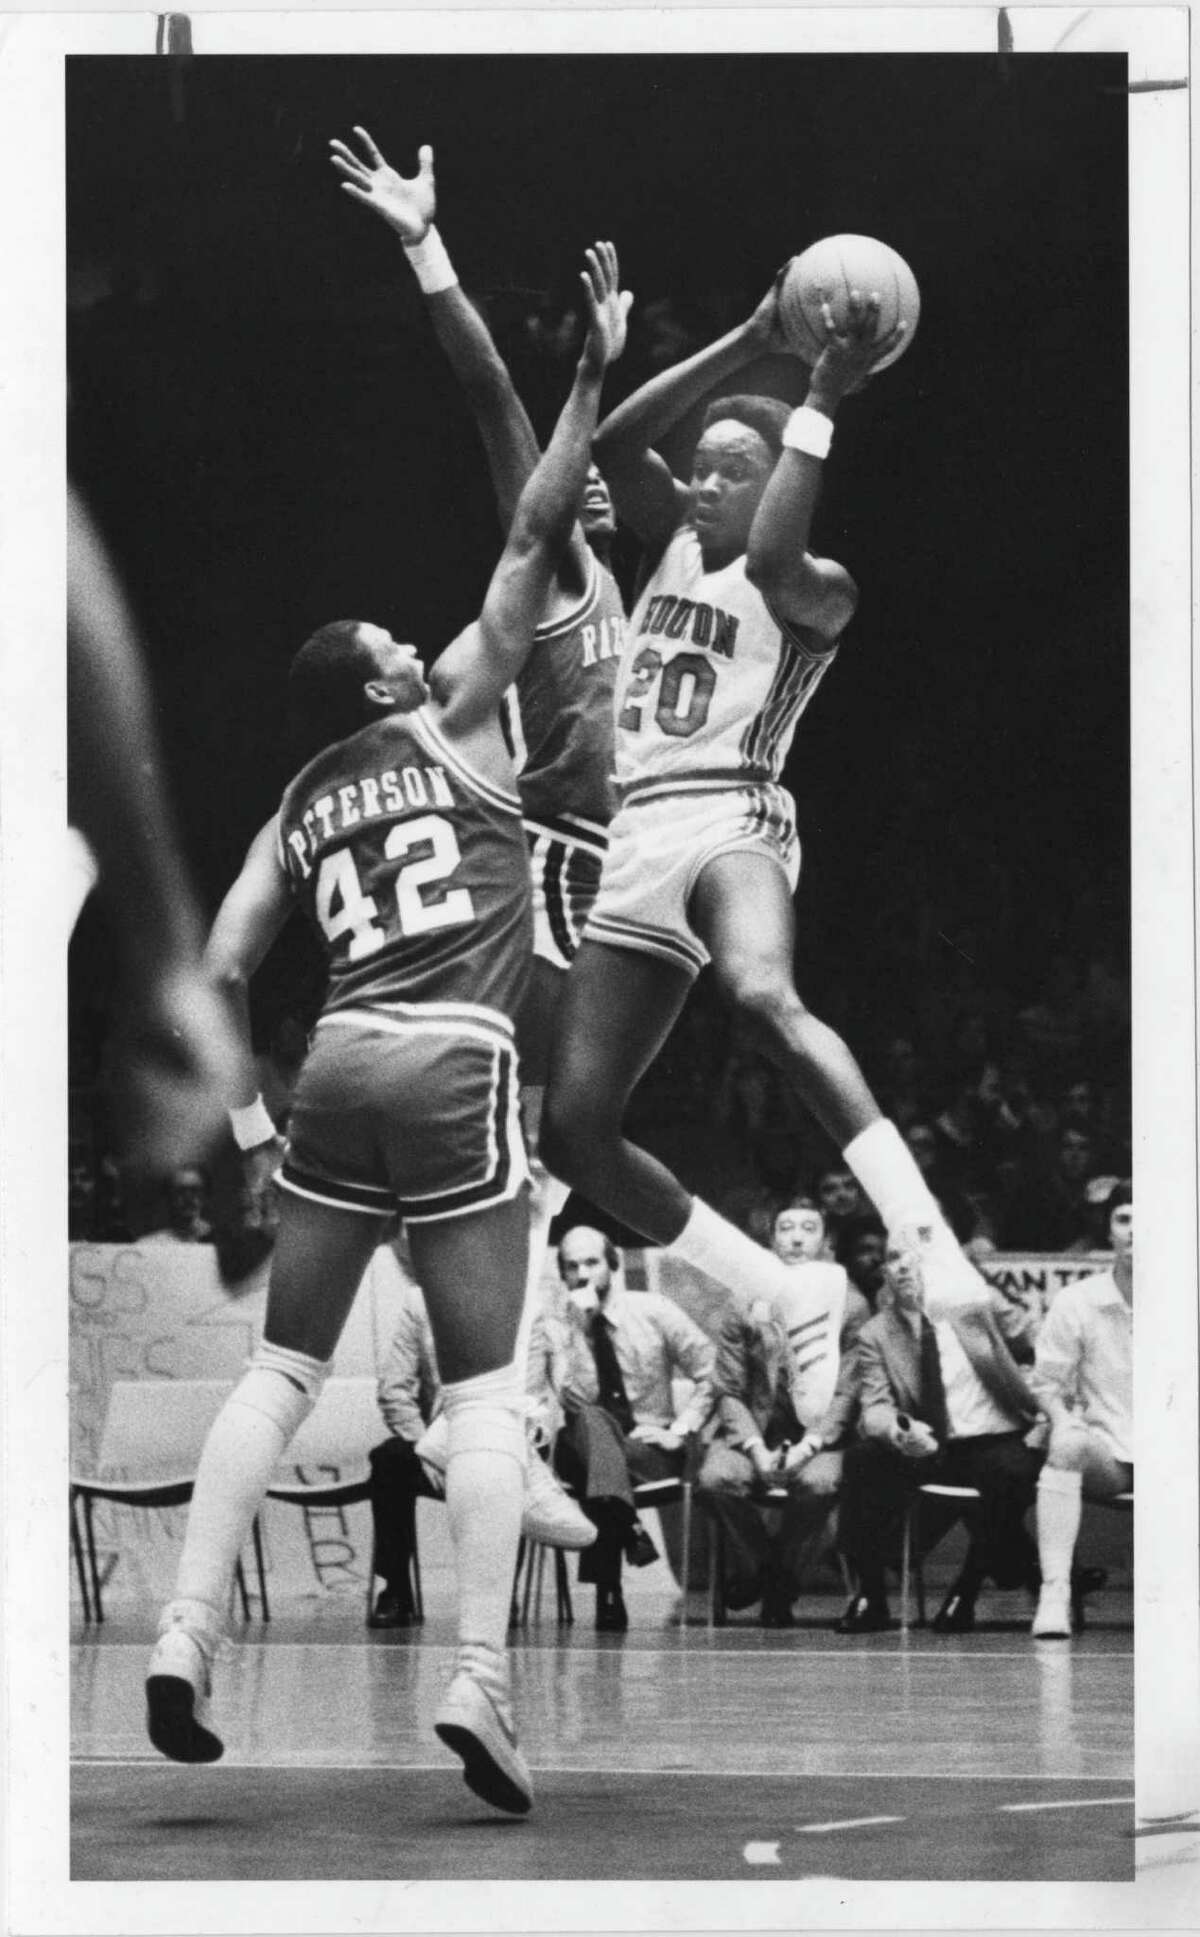 UH guard Rob Williams (20) soars through the lane past Arkansas' Keith Peterson in a Cougars victory on Feb. 13, 1982, at Hofheinz Pavillion. The old Southwest Conference rivals will meet again in 2017 and 2018.